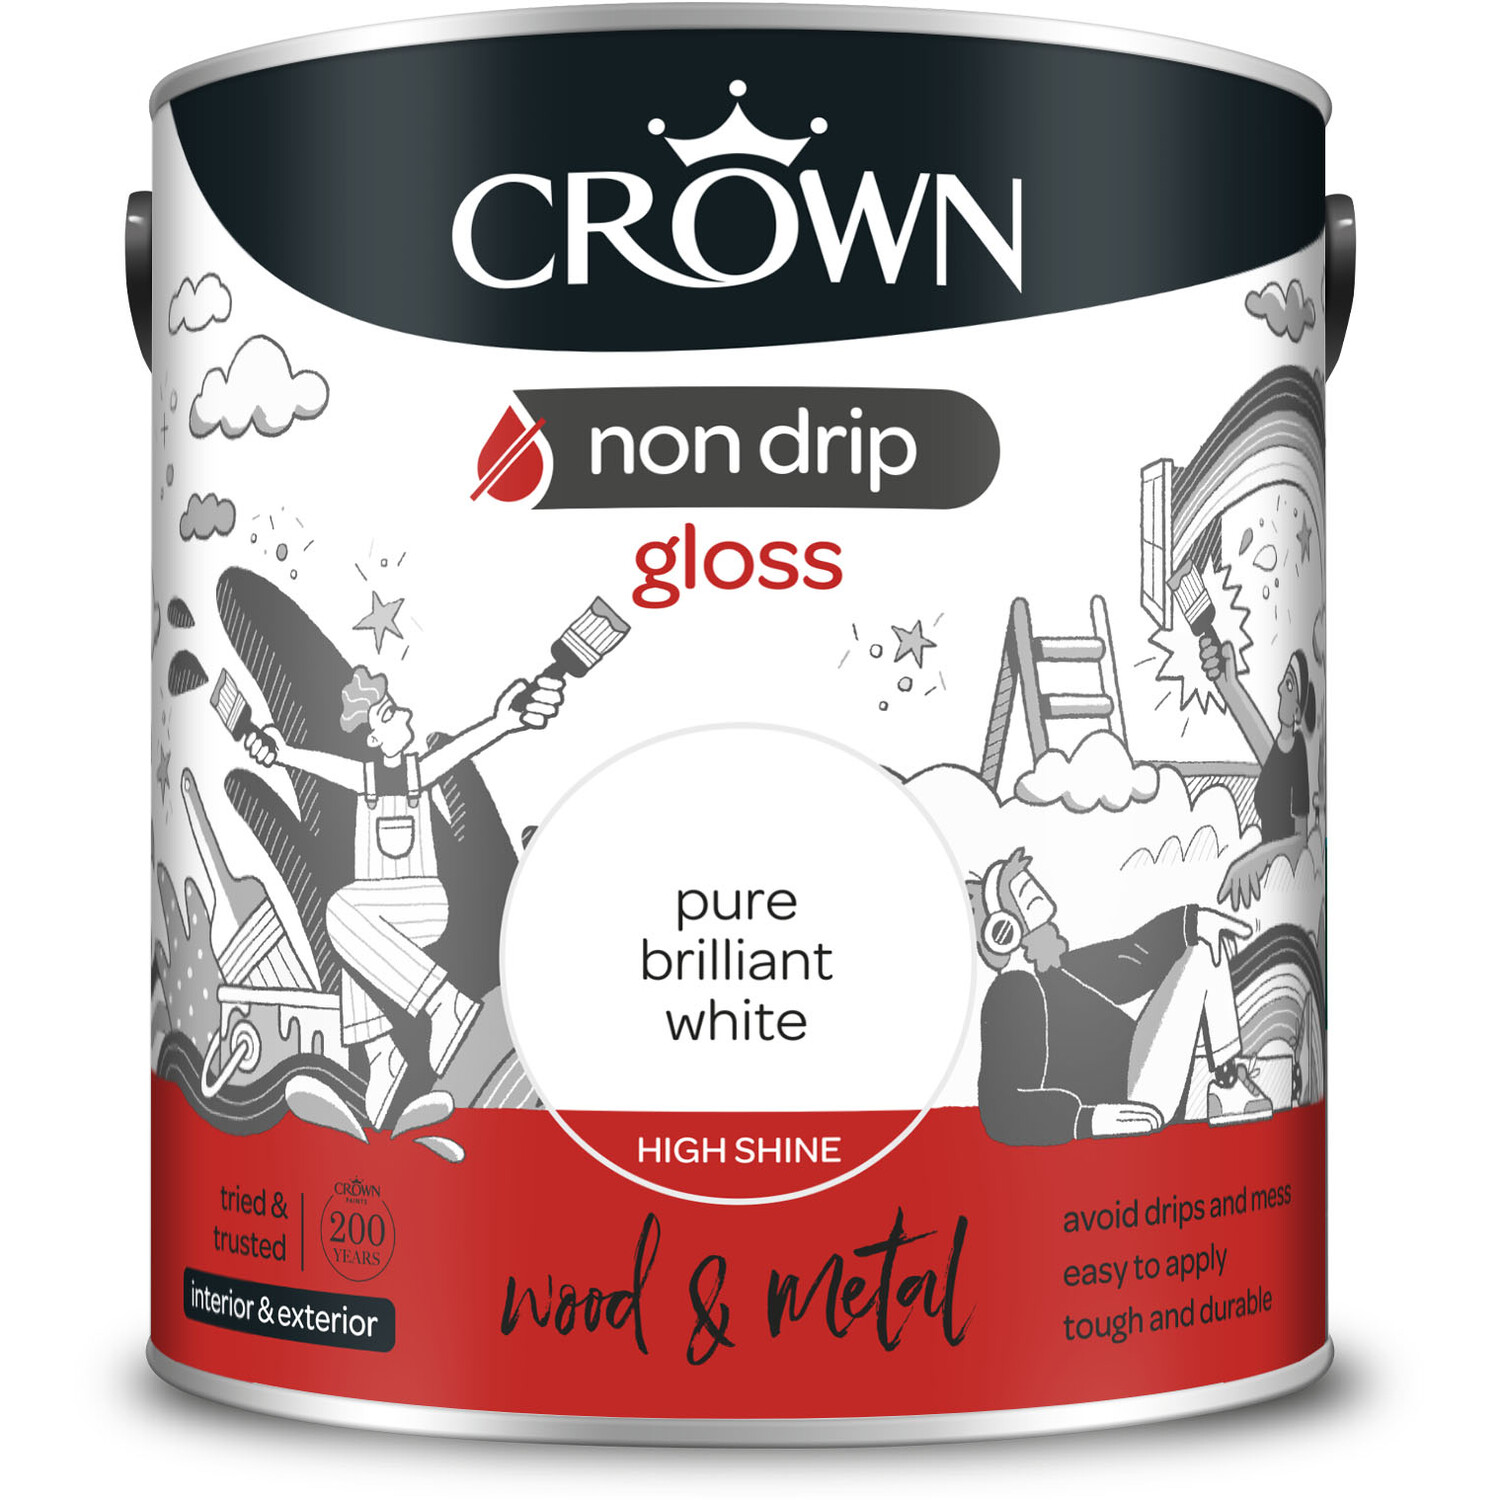 Crown Non Drip Gloss Wood and Metal Paint - Pure Brilliant White Image 3